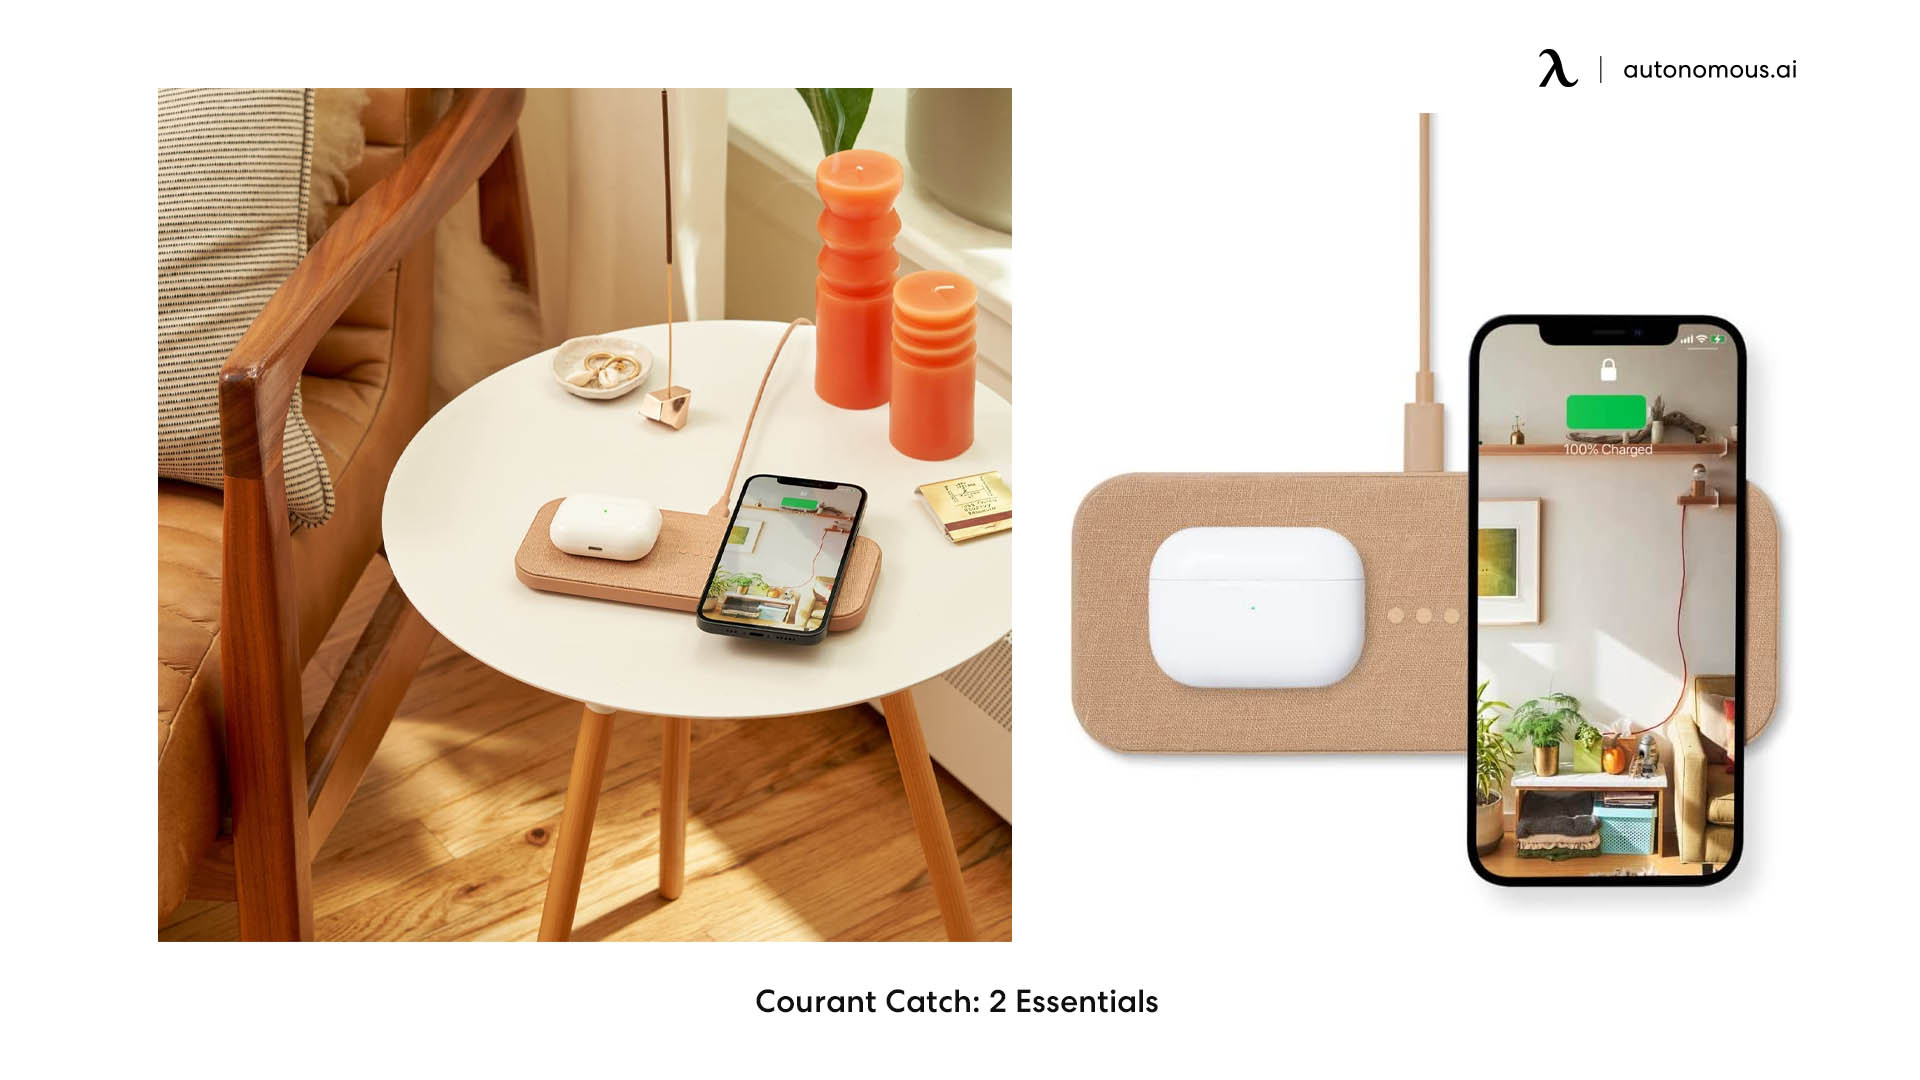 Courant Catch: 2 Essentials RGB wireless charger